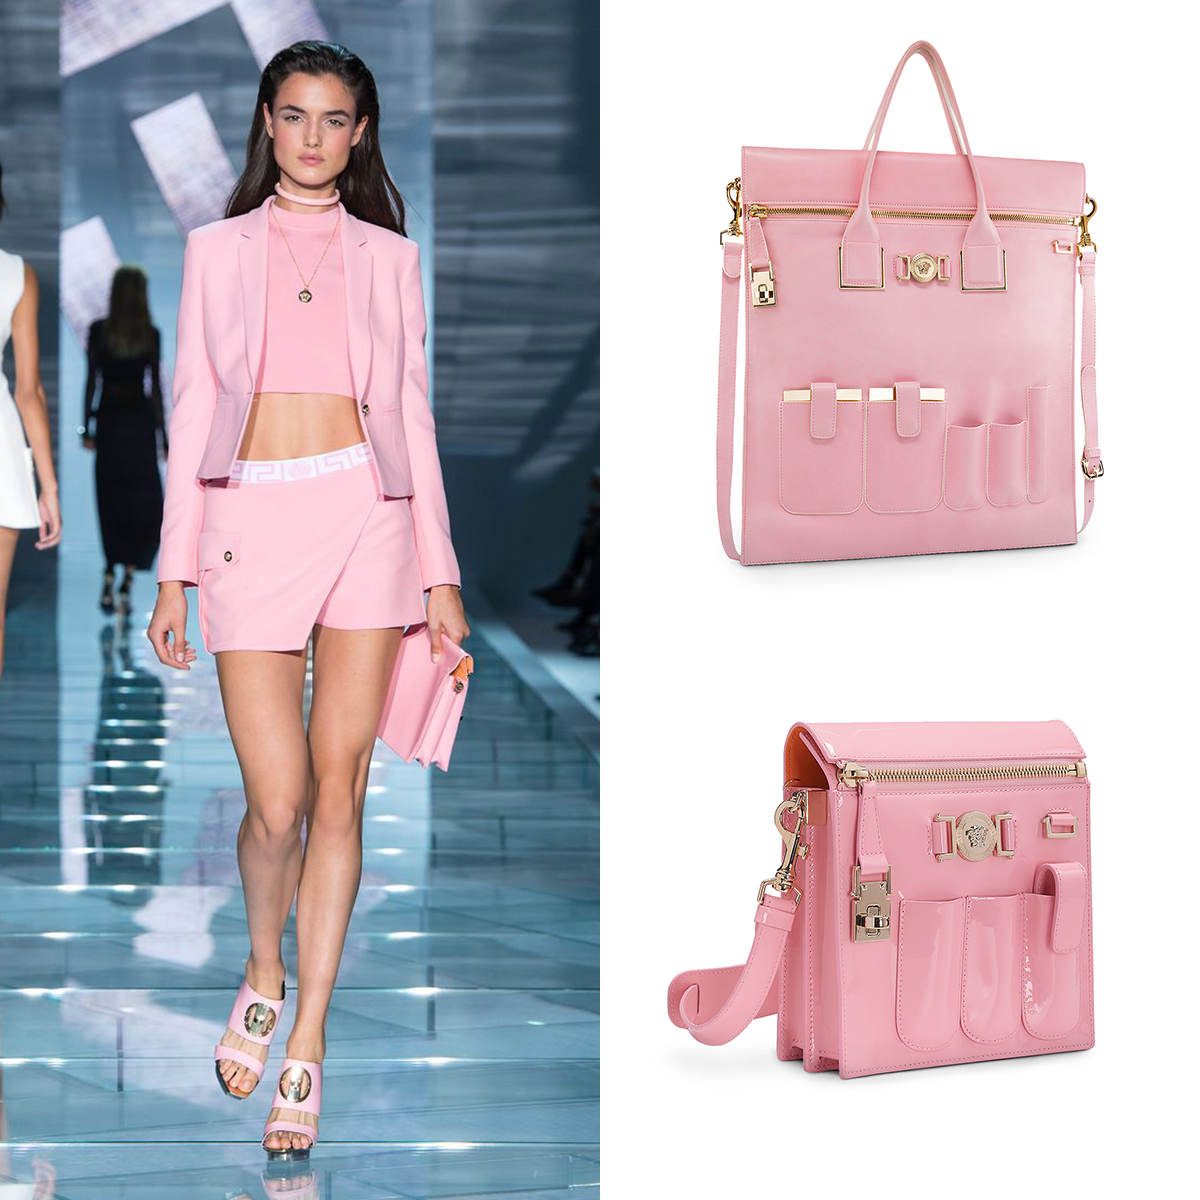 Embrace your pink bright side with VersaceWomenswear ...